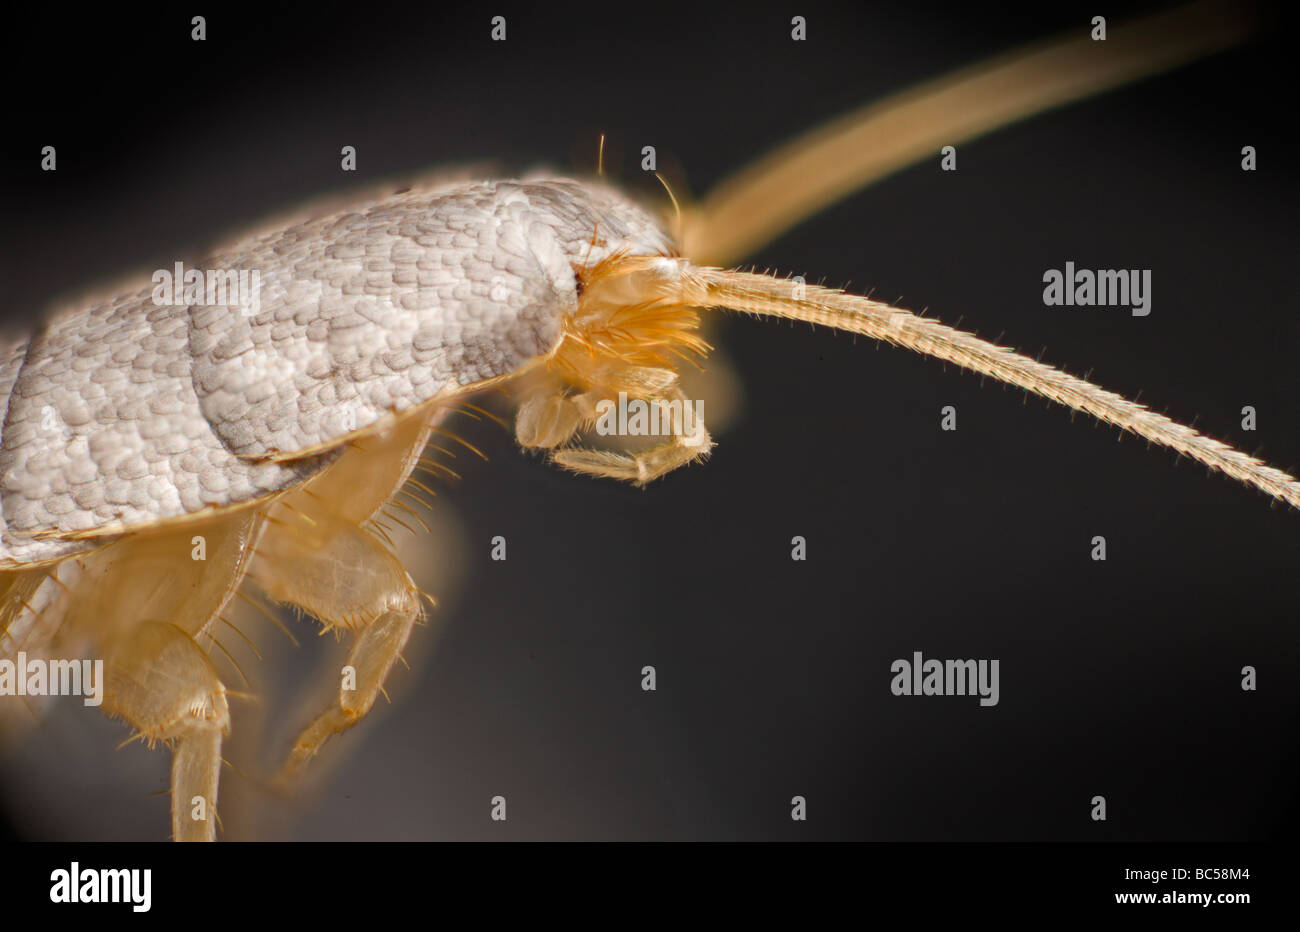 Silverfish insect, Lepisma saccharina high macro of head showing scales. Stock Photo